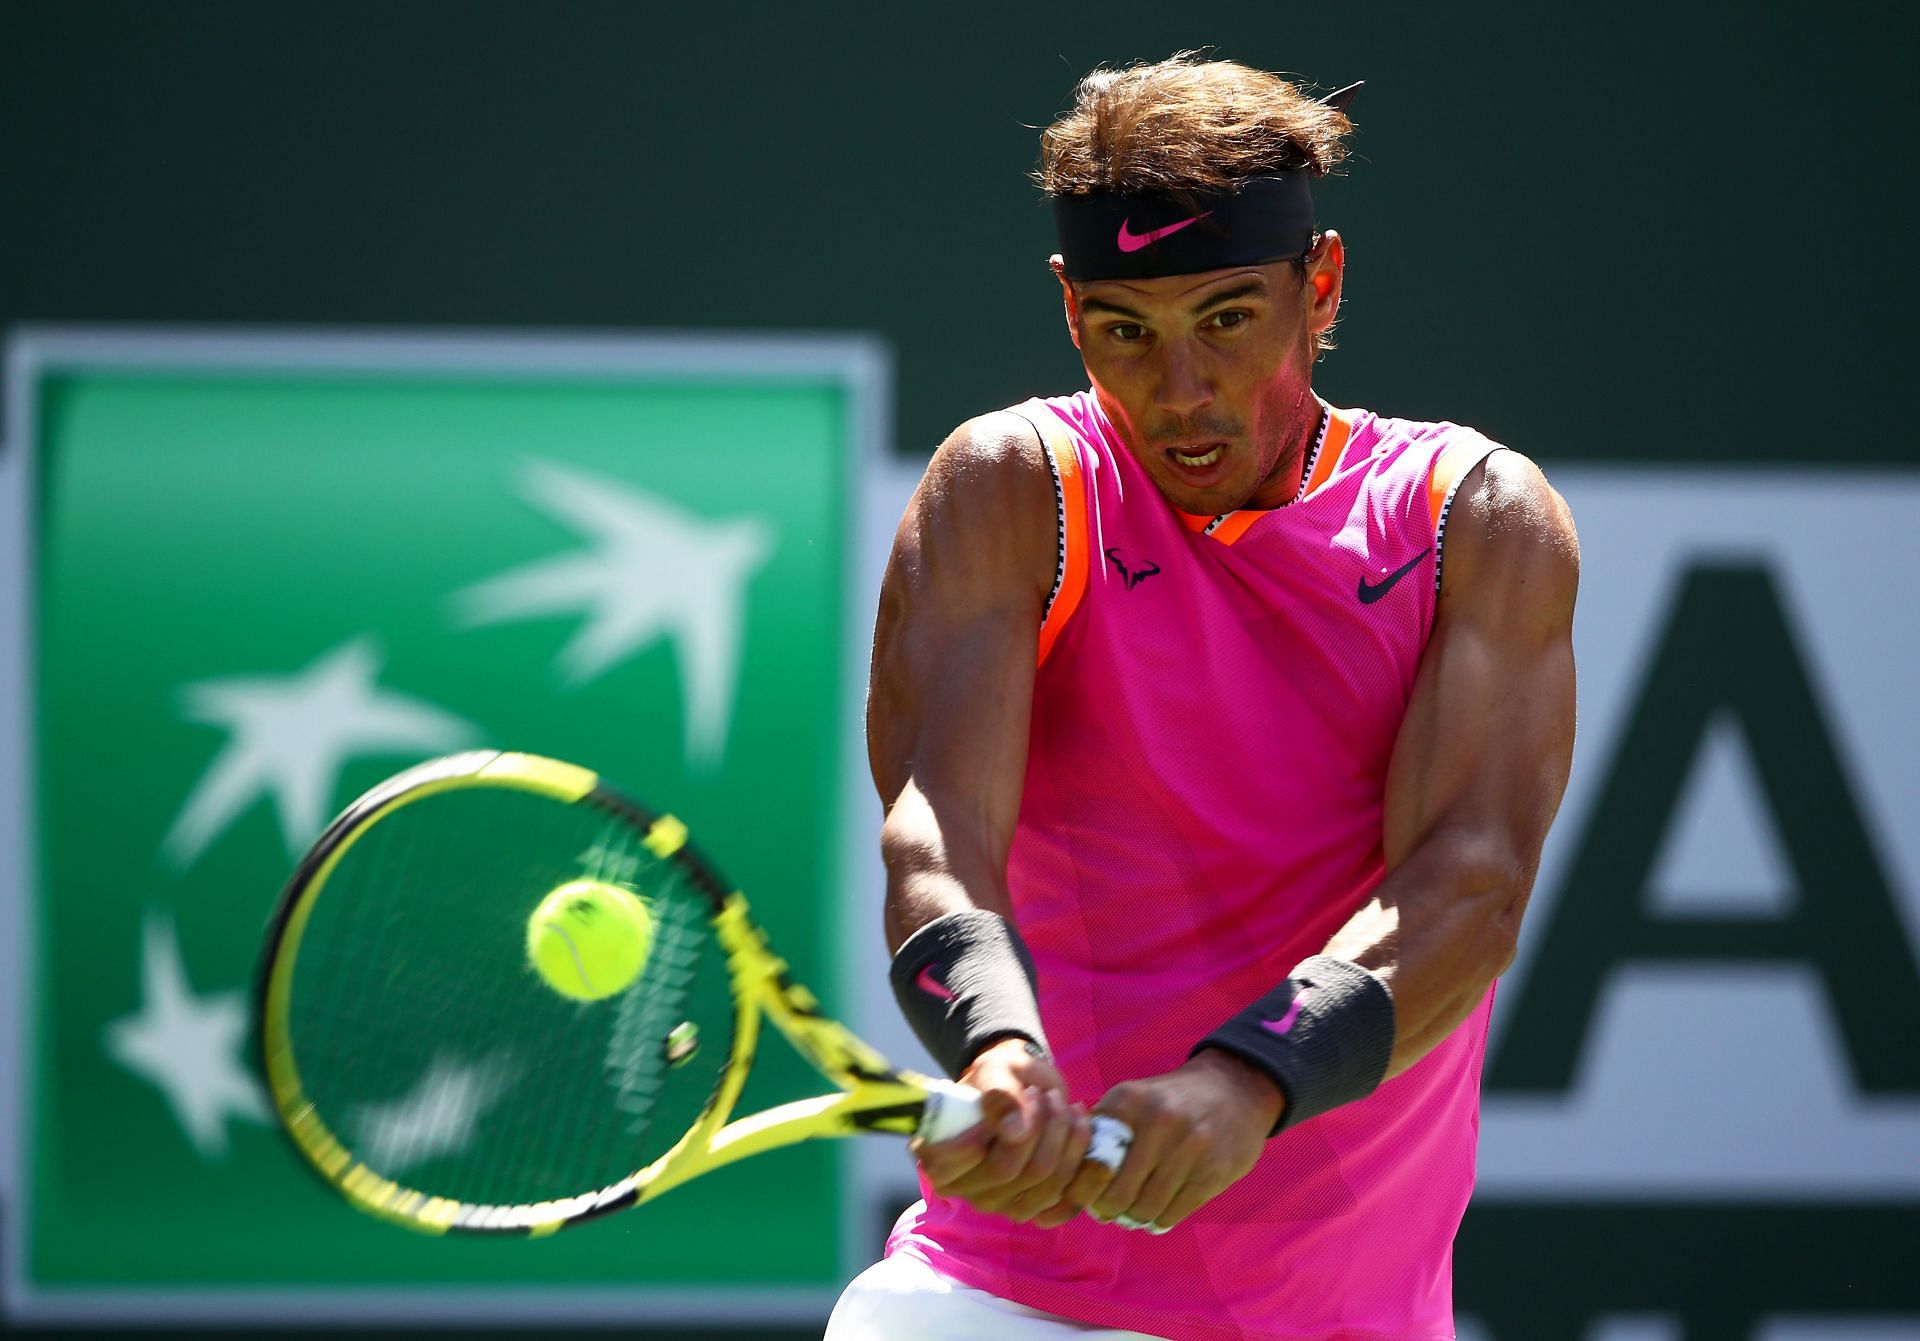 he Spaniard has won the Indian Wells Masters on three occasions, the last time in 2013